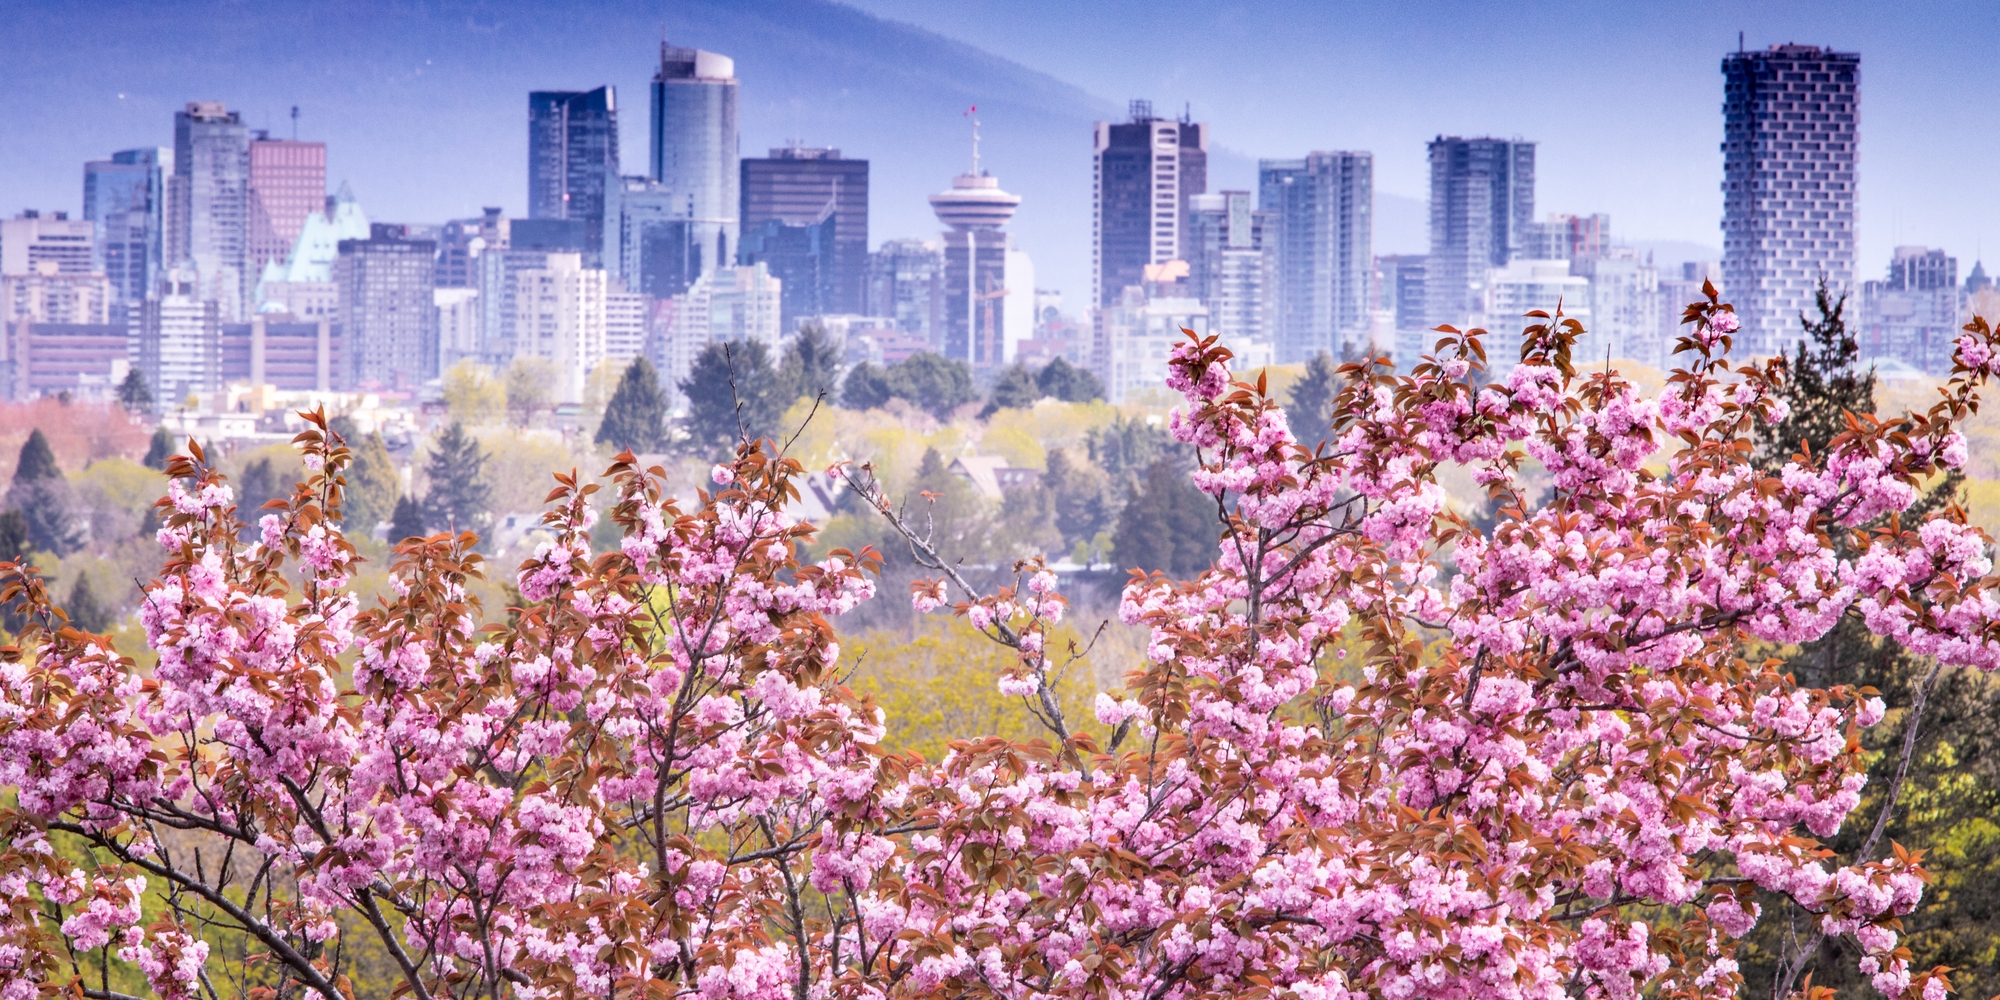 Cherry blossoms with downtown Vancouver skyline in background | Destination Vancouver/Vision Event Photography Inc.